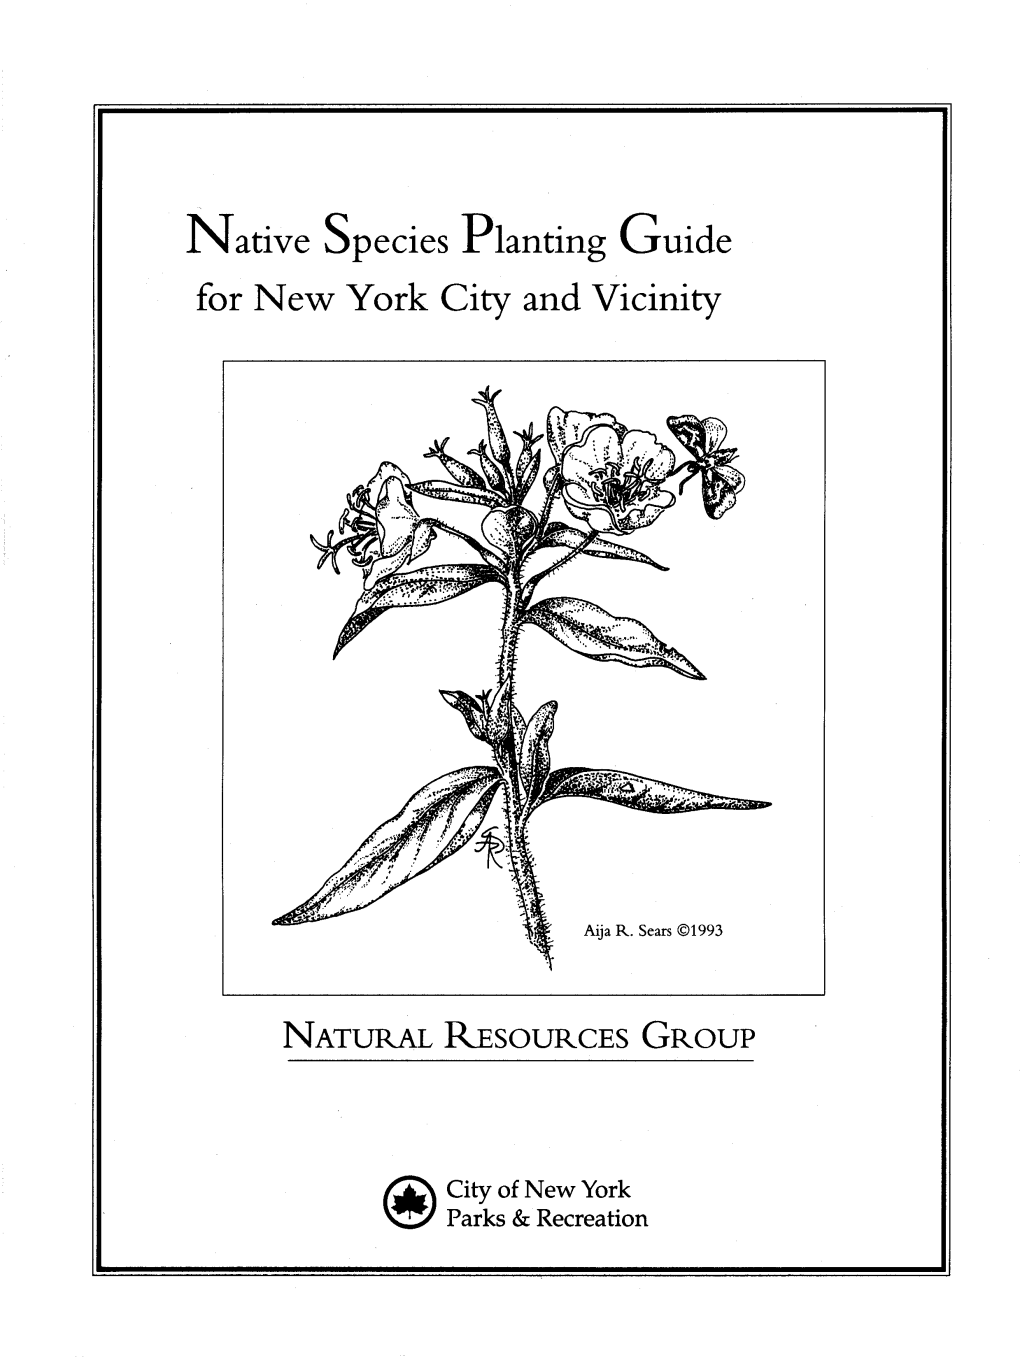 Native Species Planting Guide Was Originally Published in 1993